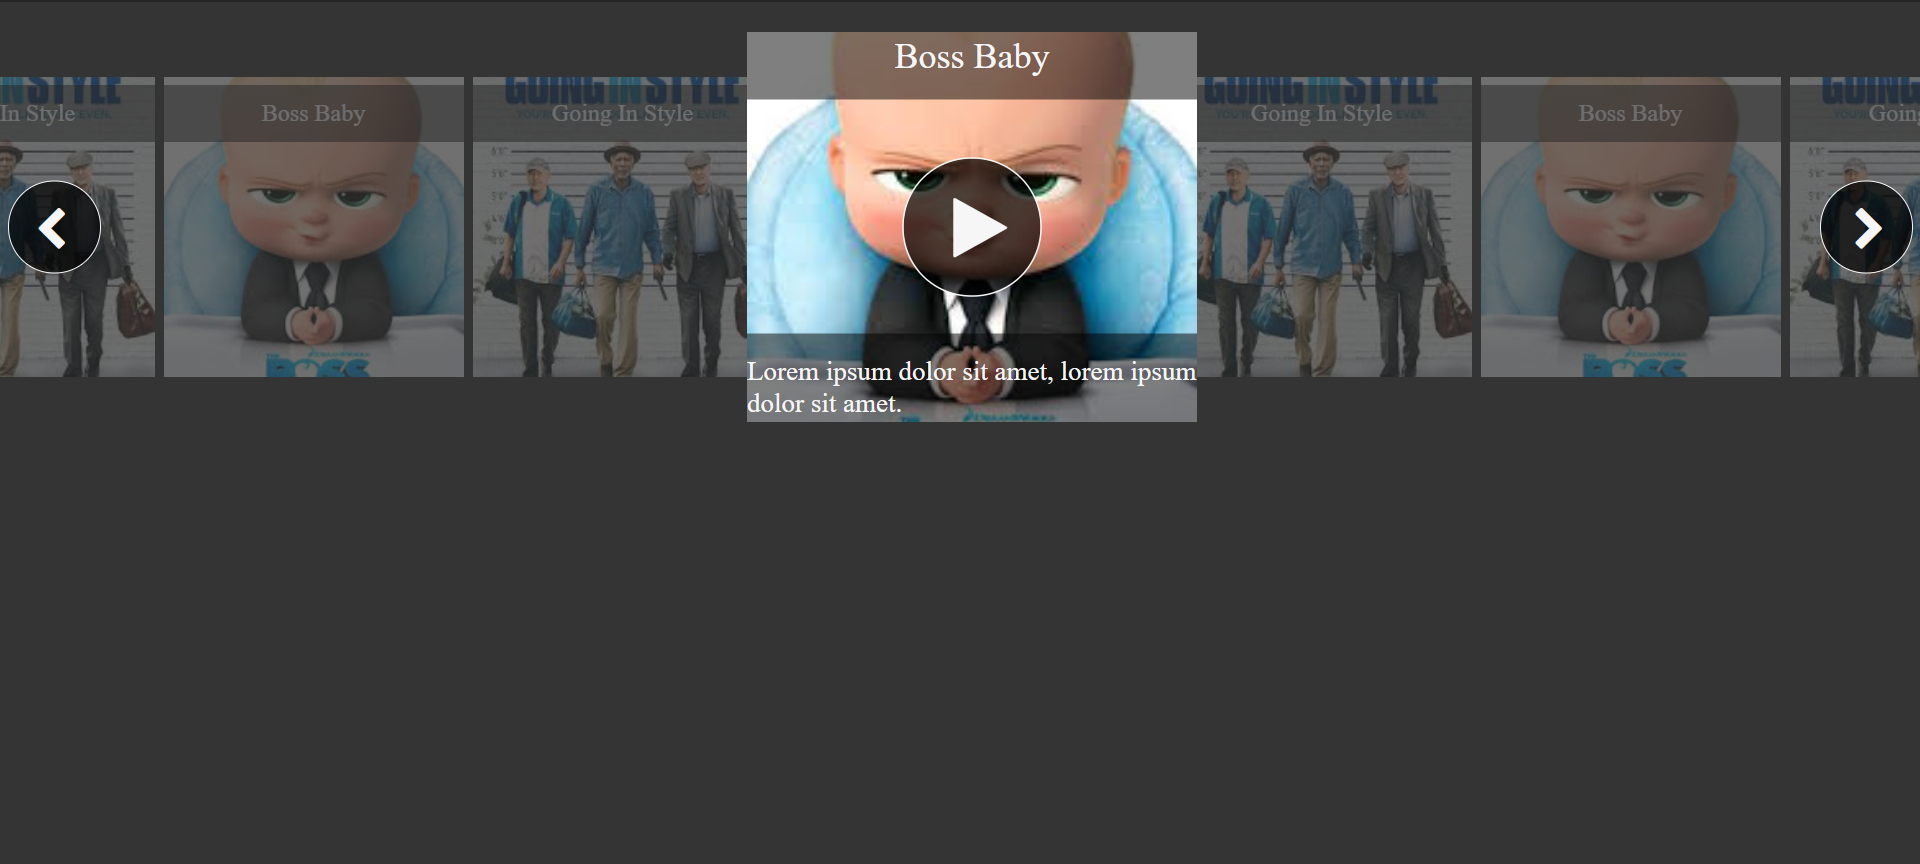 netflix-style-slider-on-hover-with-navigation-buttons-using-css-and-javascript